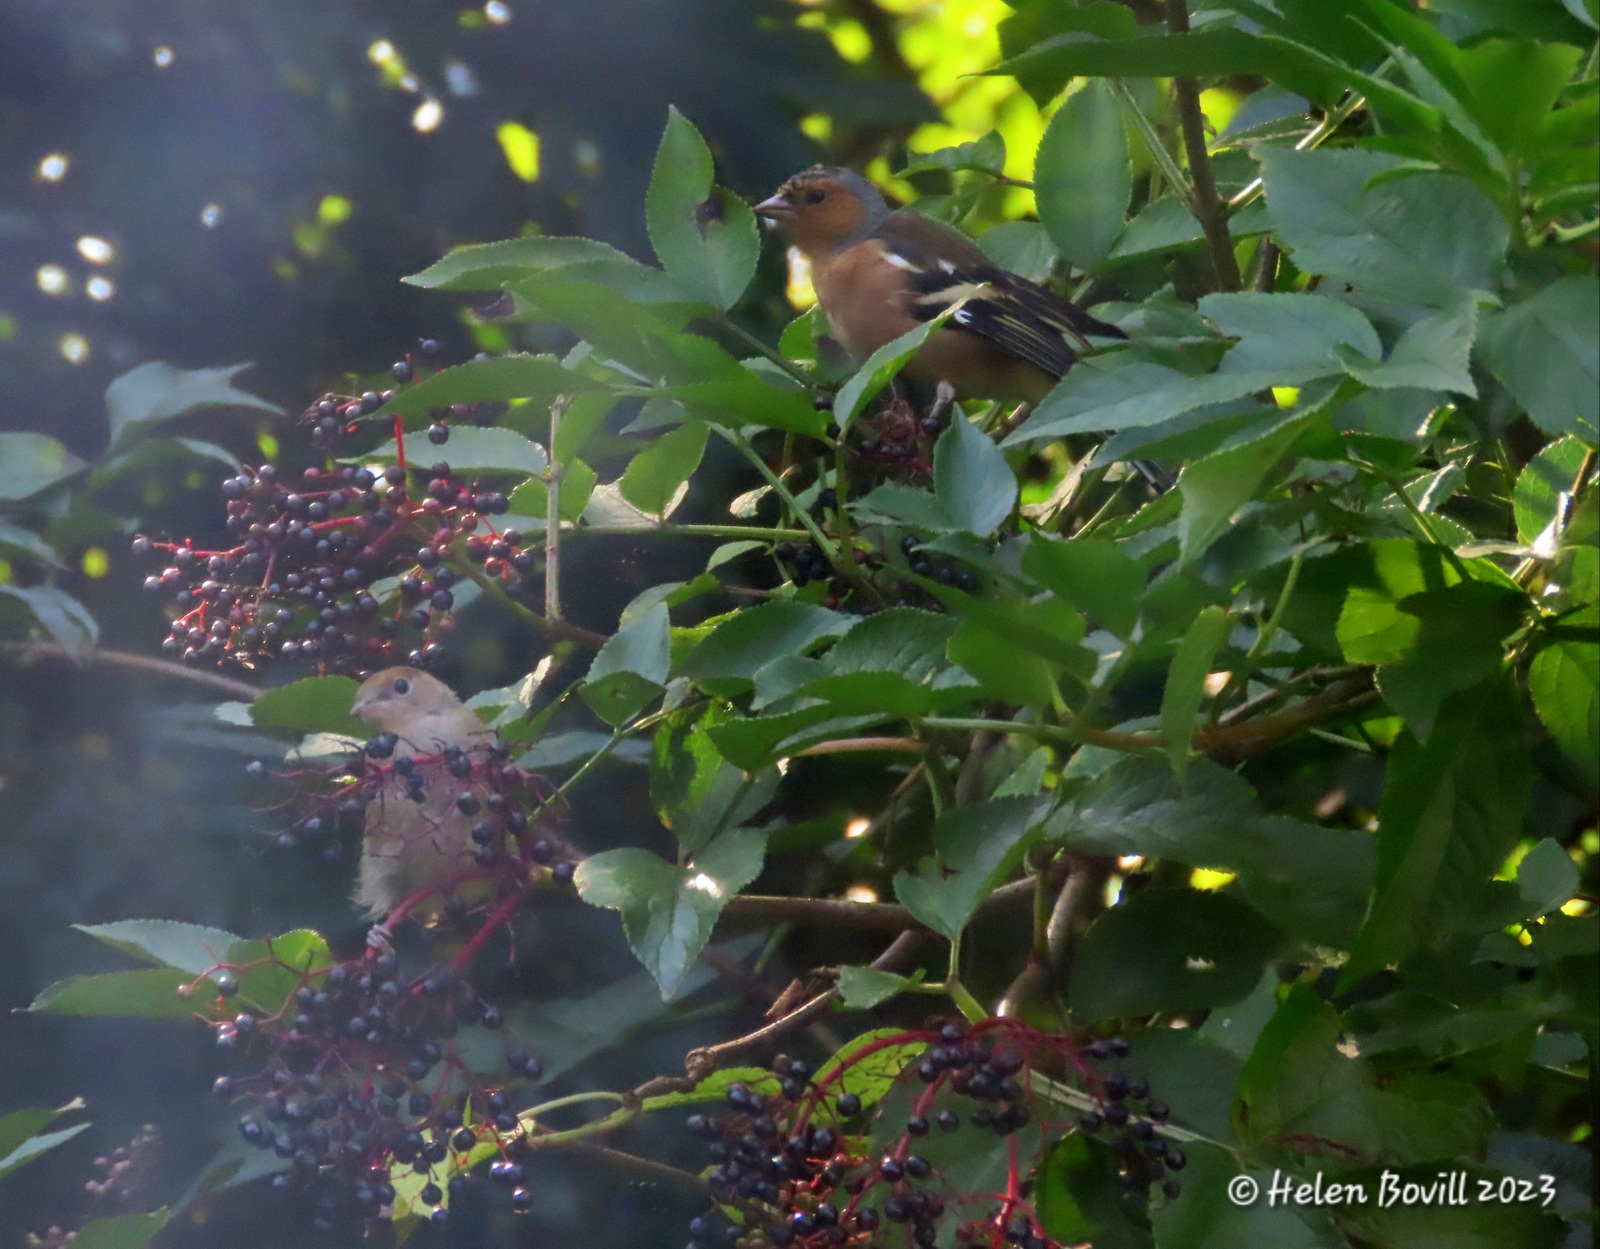 A female Blackcap and a male Chaffinch perched in an Elderberry tree